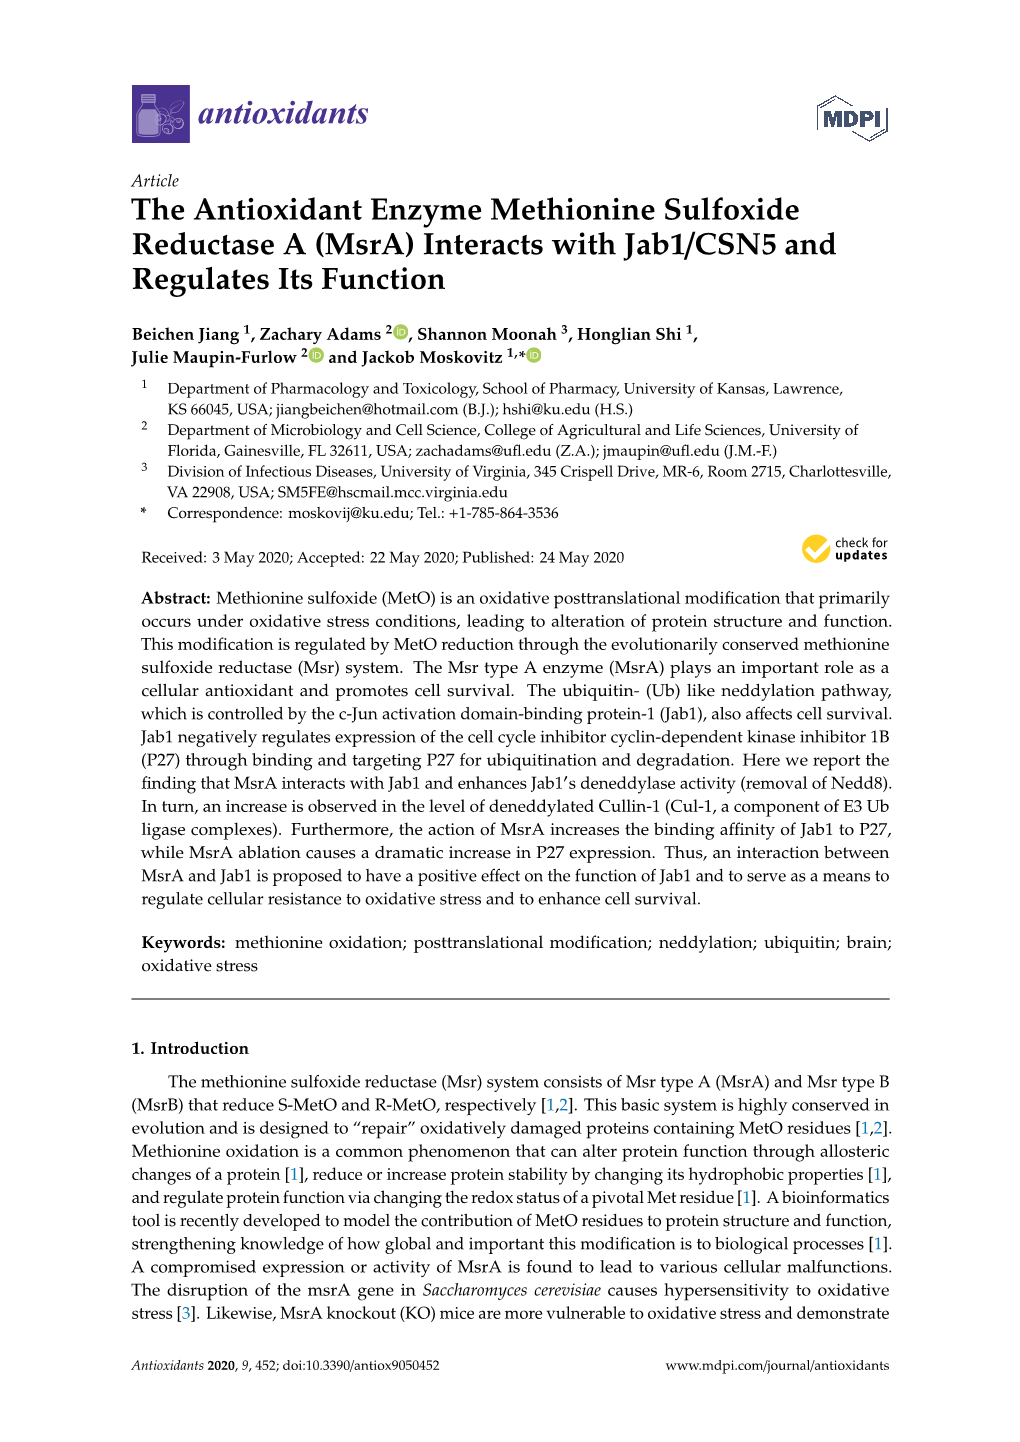 (Msra) Interacts with Jab1/CSN5 and Regulates Its Function